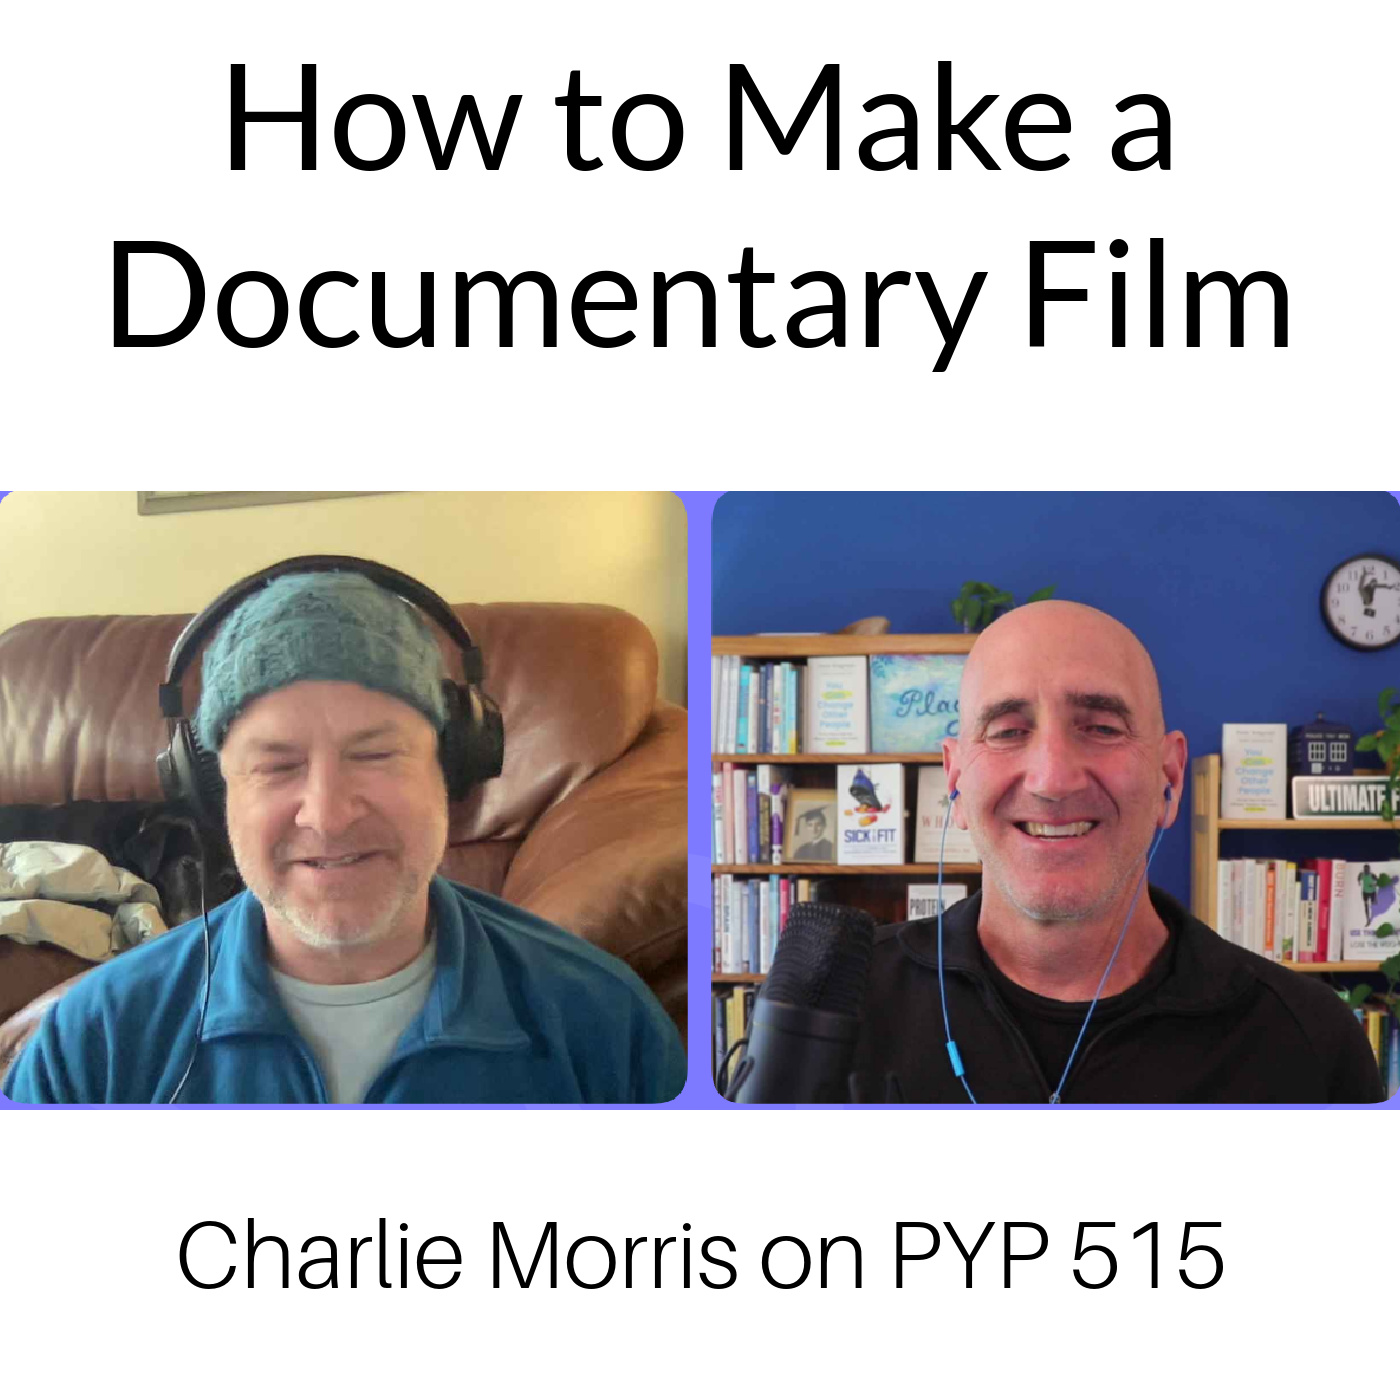 How to Make a Documentary Film: Charlie Morris on PYP 515